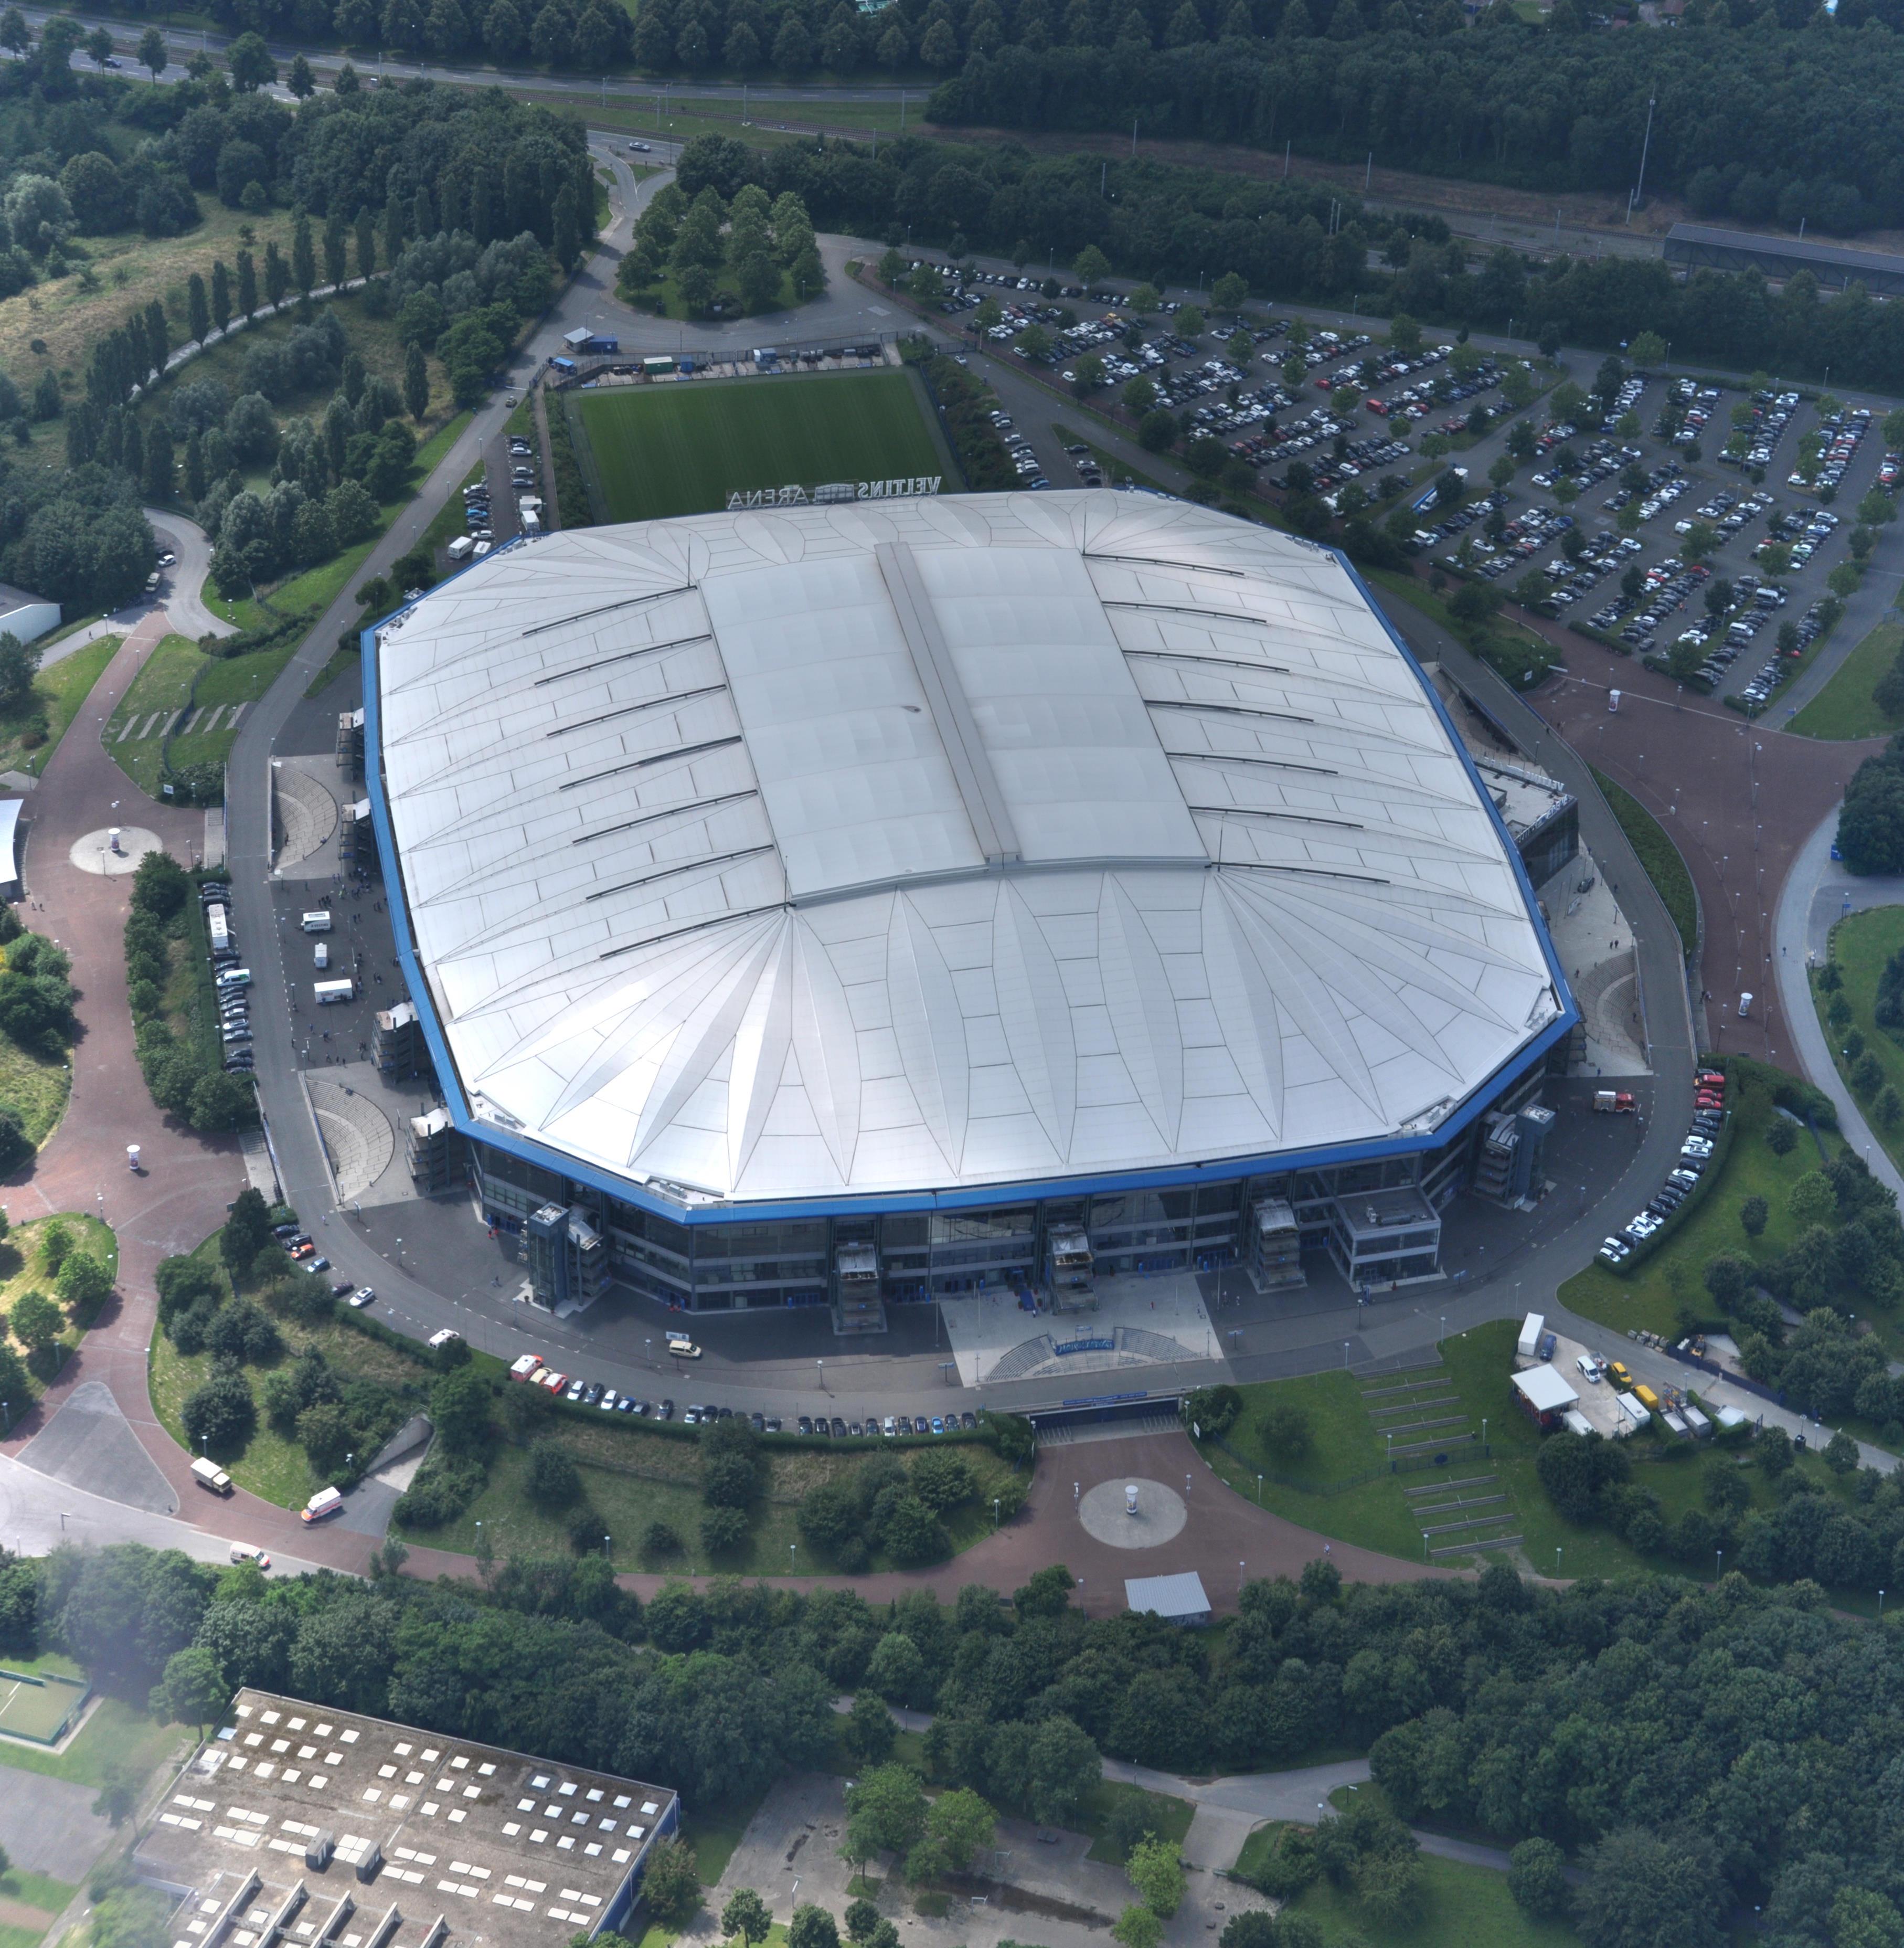 The Arena AufSchalke is surrounded by trees and car parks.